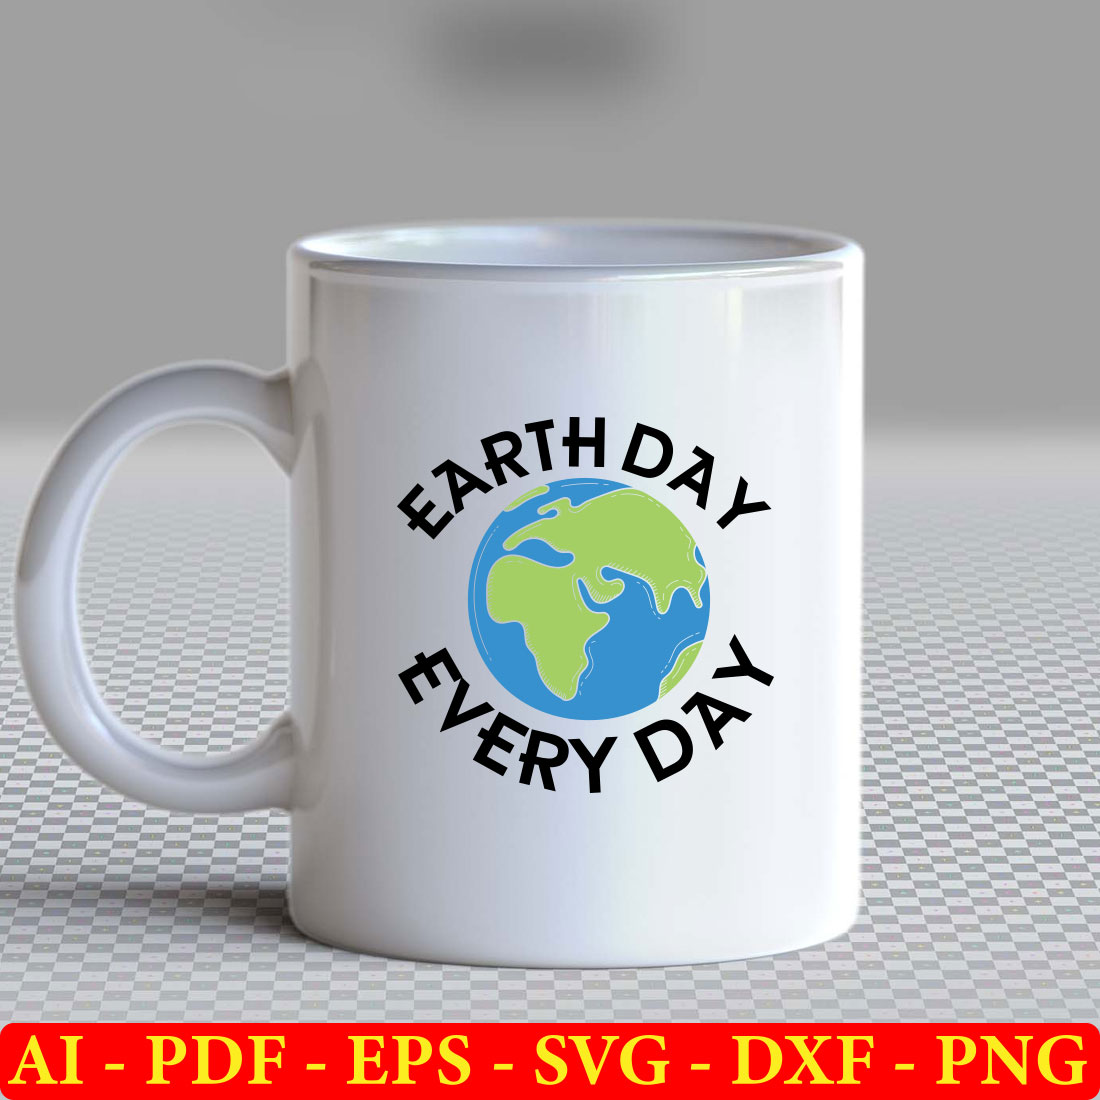 White coffee mug with the words earth day every day printed on it.